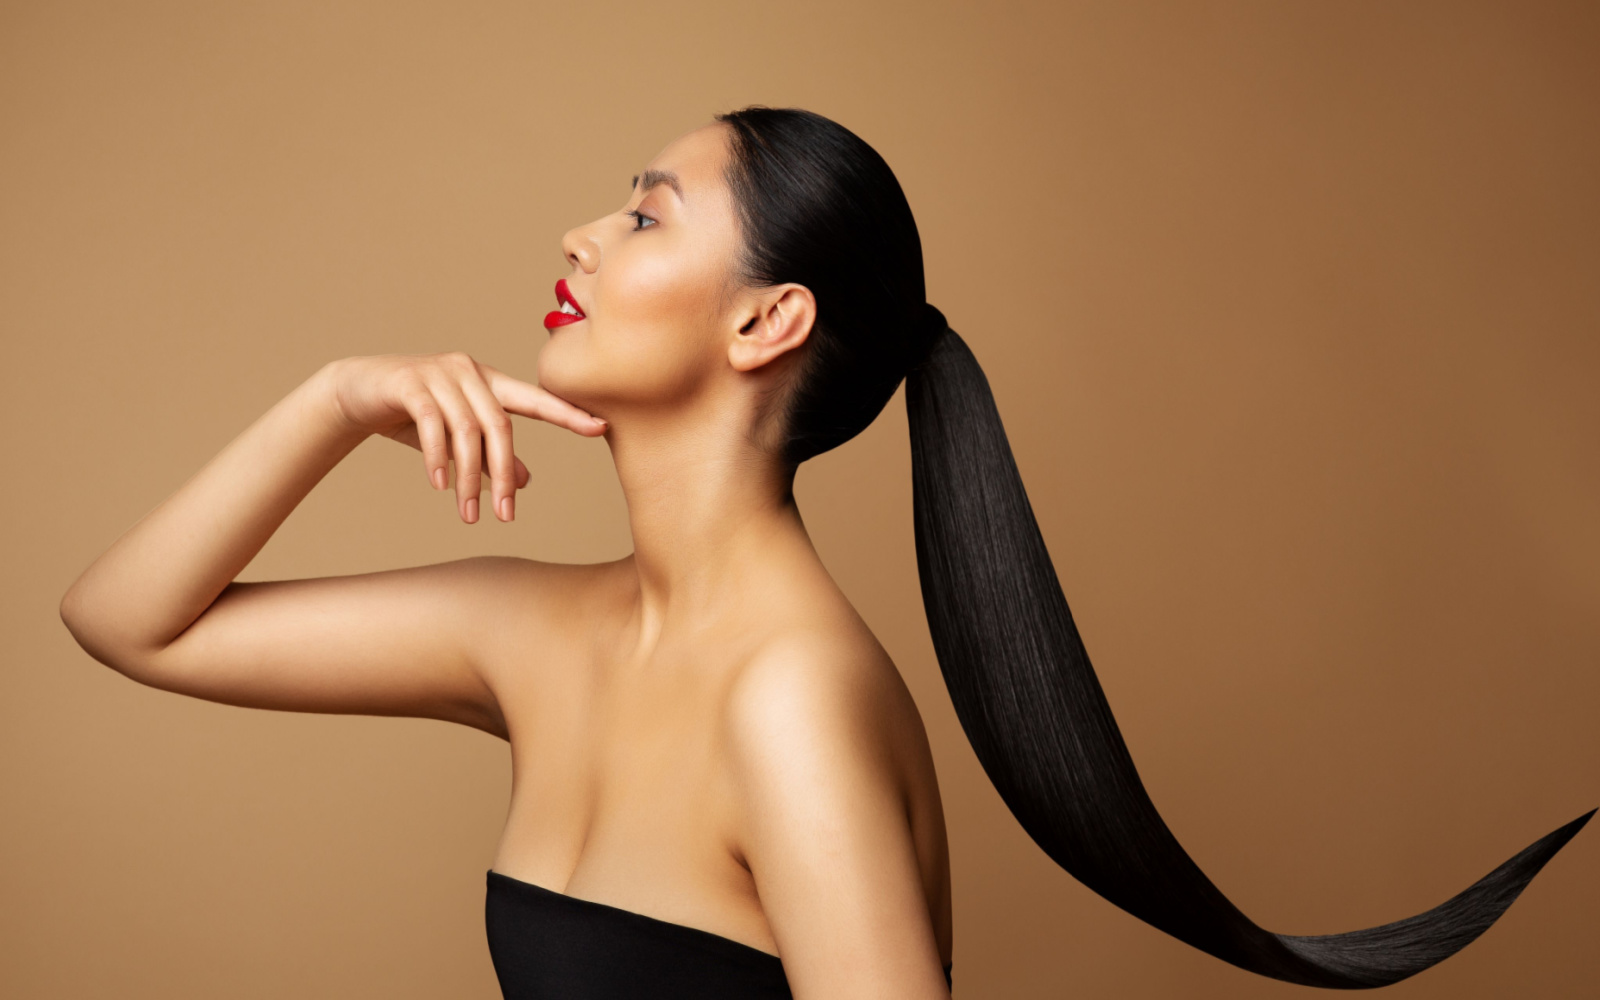 How to Do a Sleek Ponytail | Step-by-Step Guide